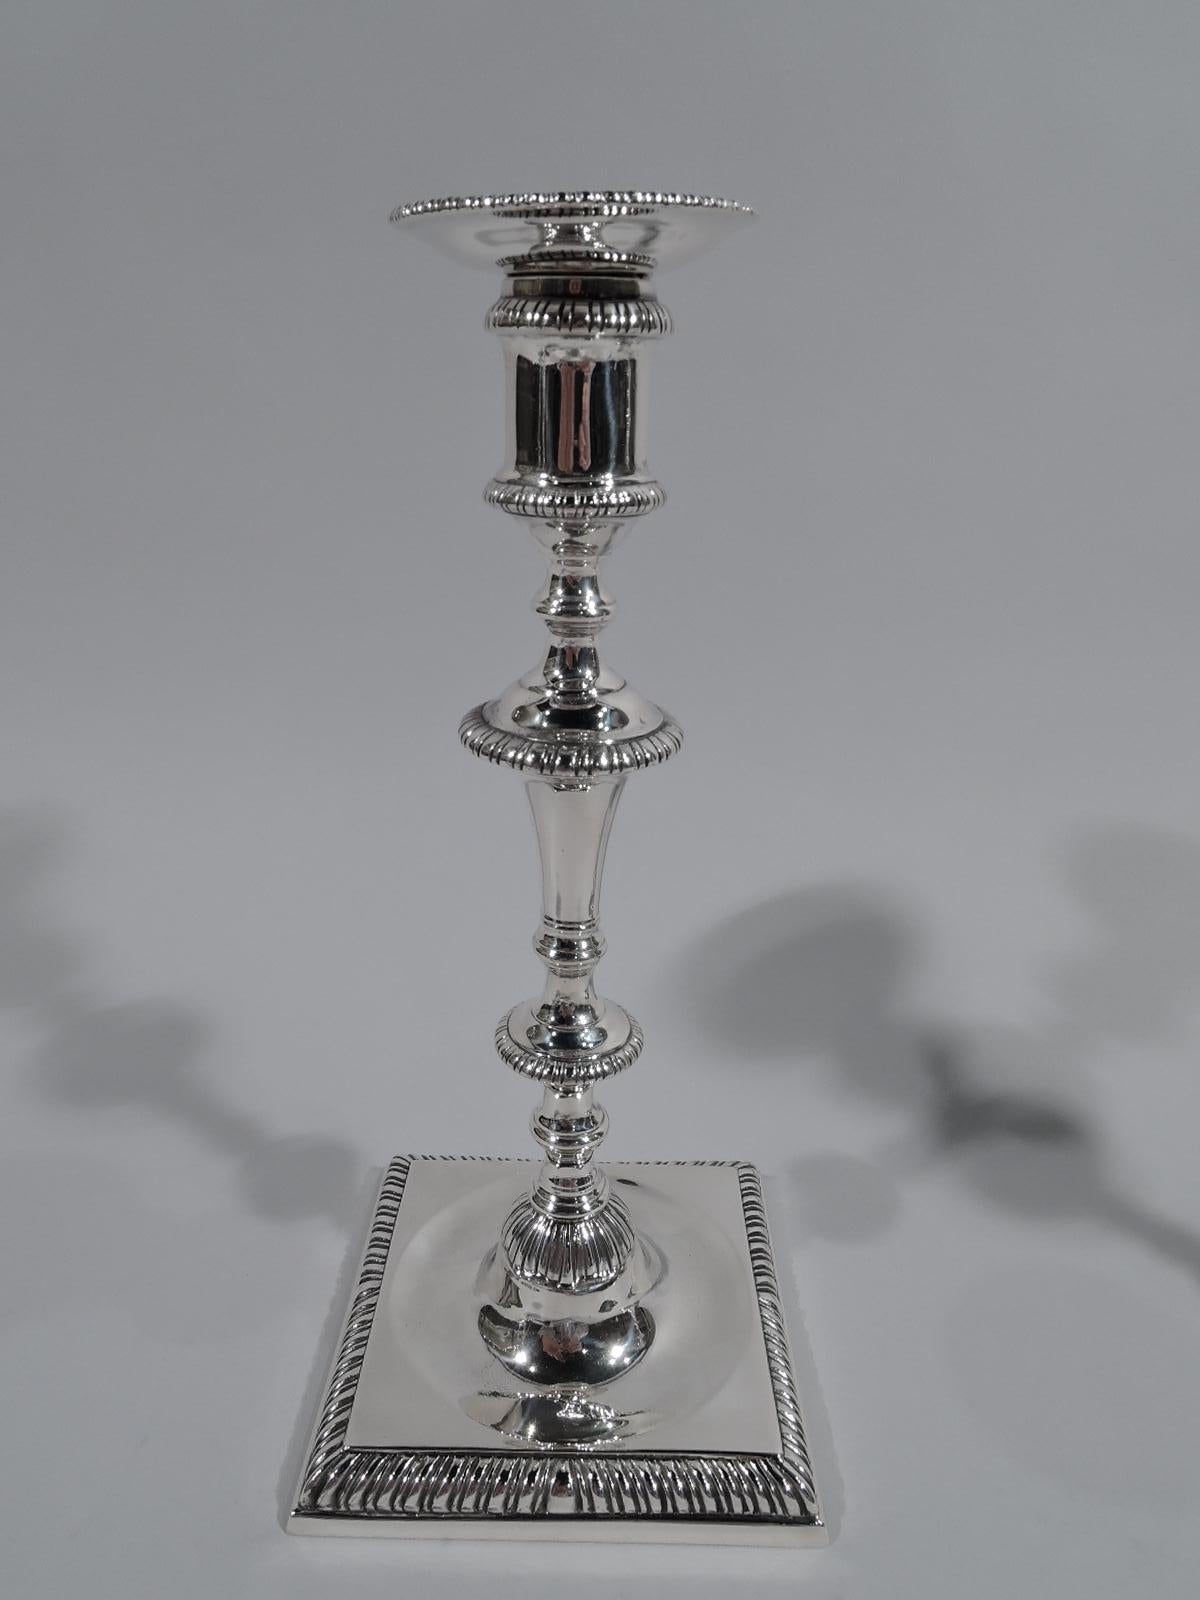 Pair of Georgian-style sterling silver candlesticks. Made by Crichton & Co. Ltd in New York, circa 1920. Each: Spool socket with detachable bobeche on shaft with knops and flanges terminating in leafy-dome on square base. Traditional form with